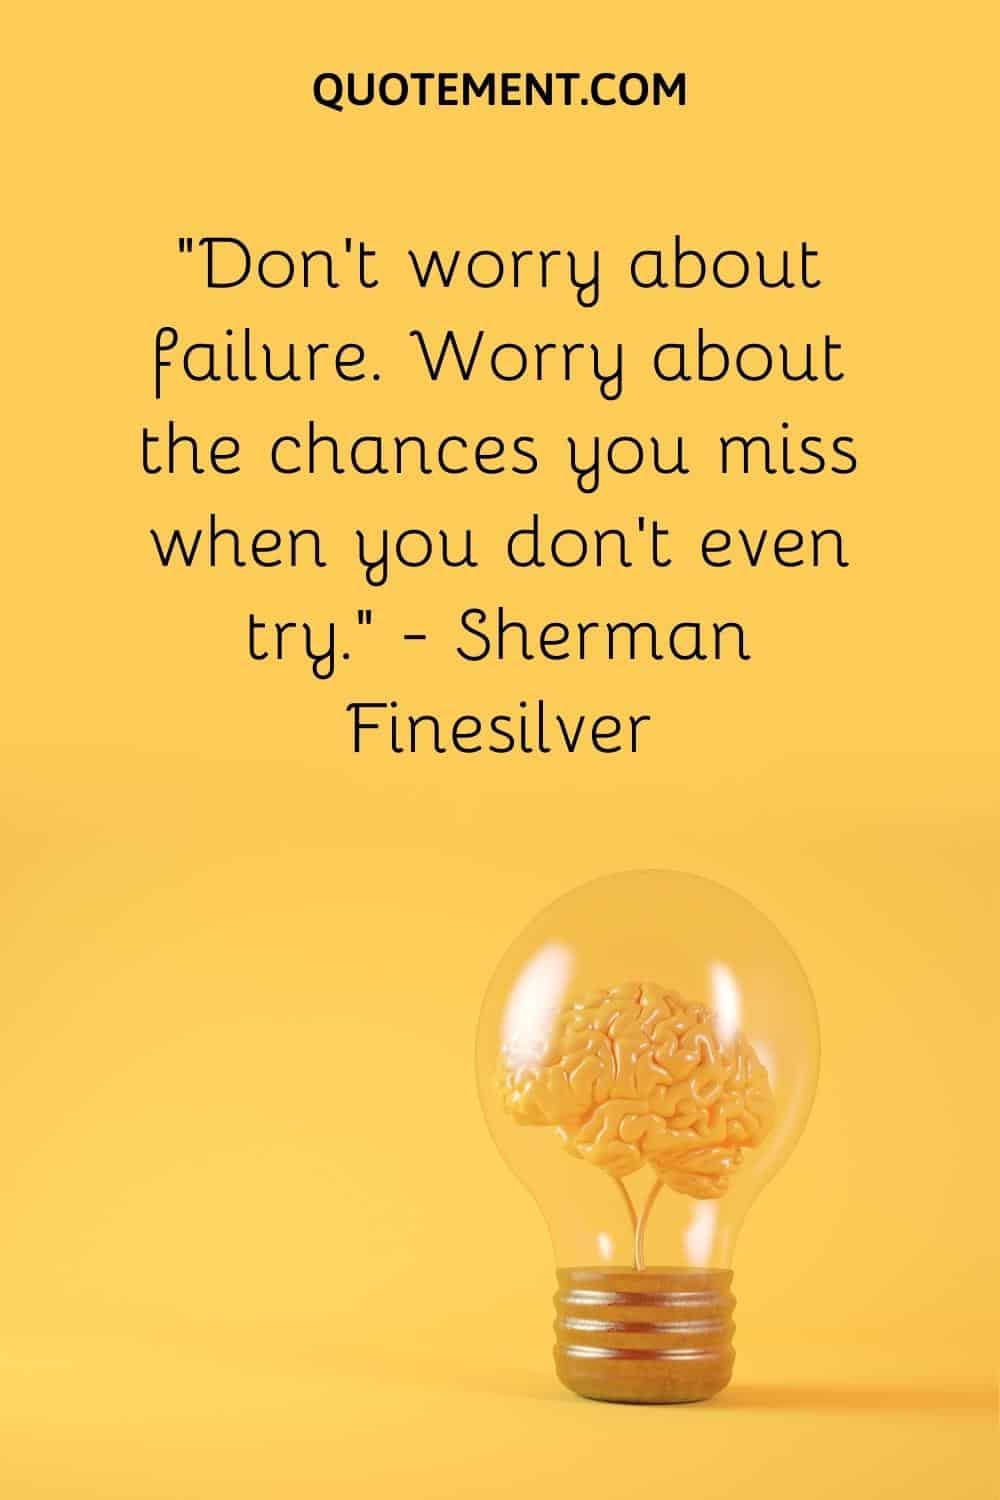 “Don’t worry about failure. Worry about the chances you miss when you don’t even try.” — Sherman Finesilver